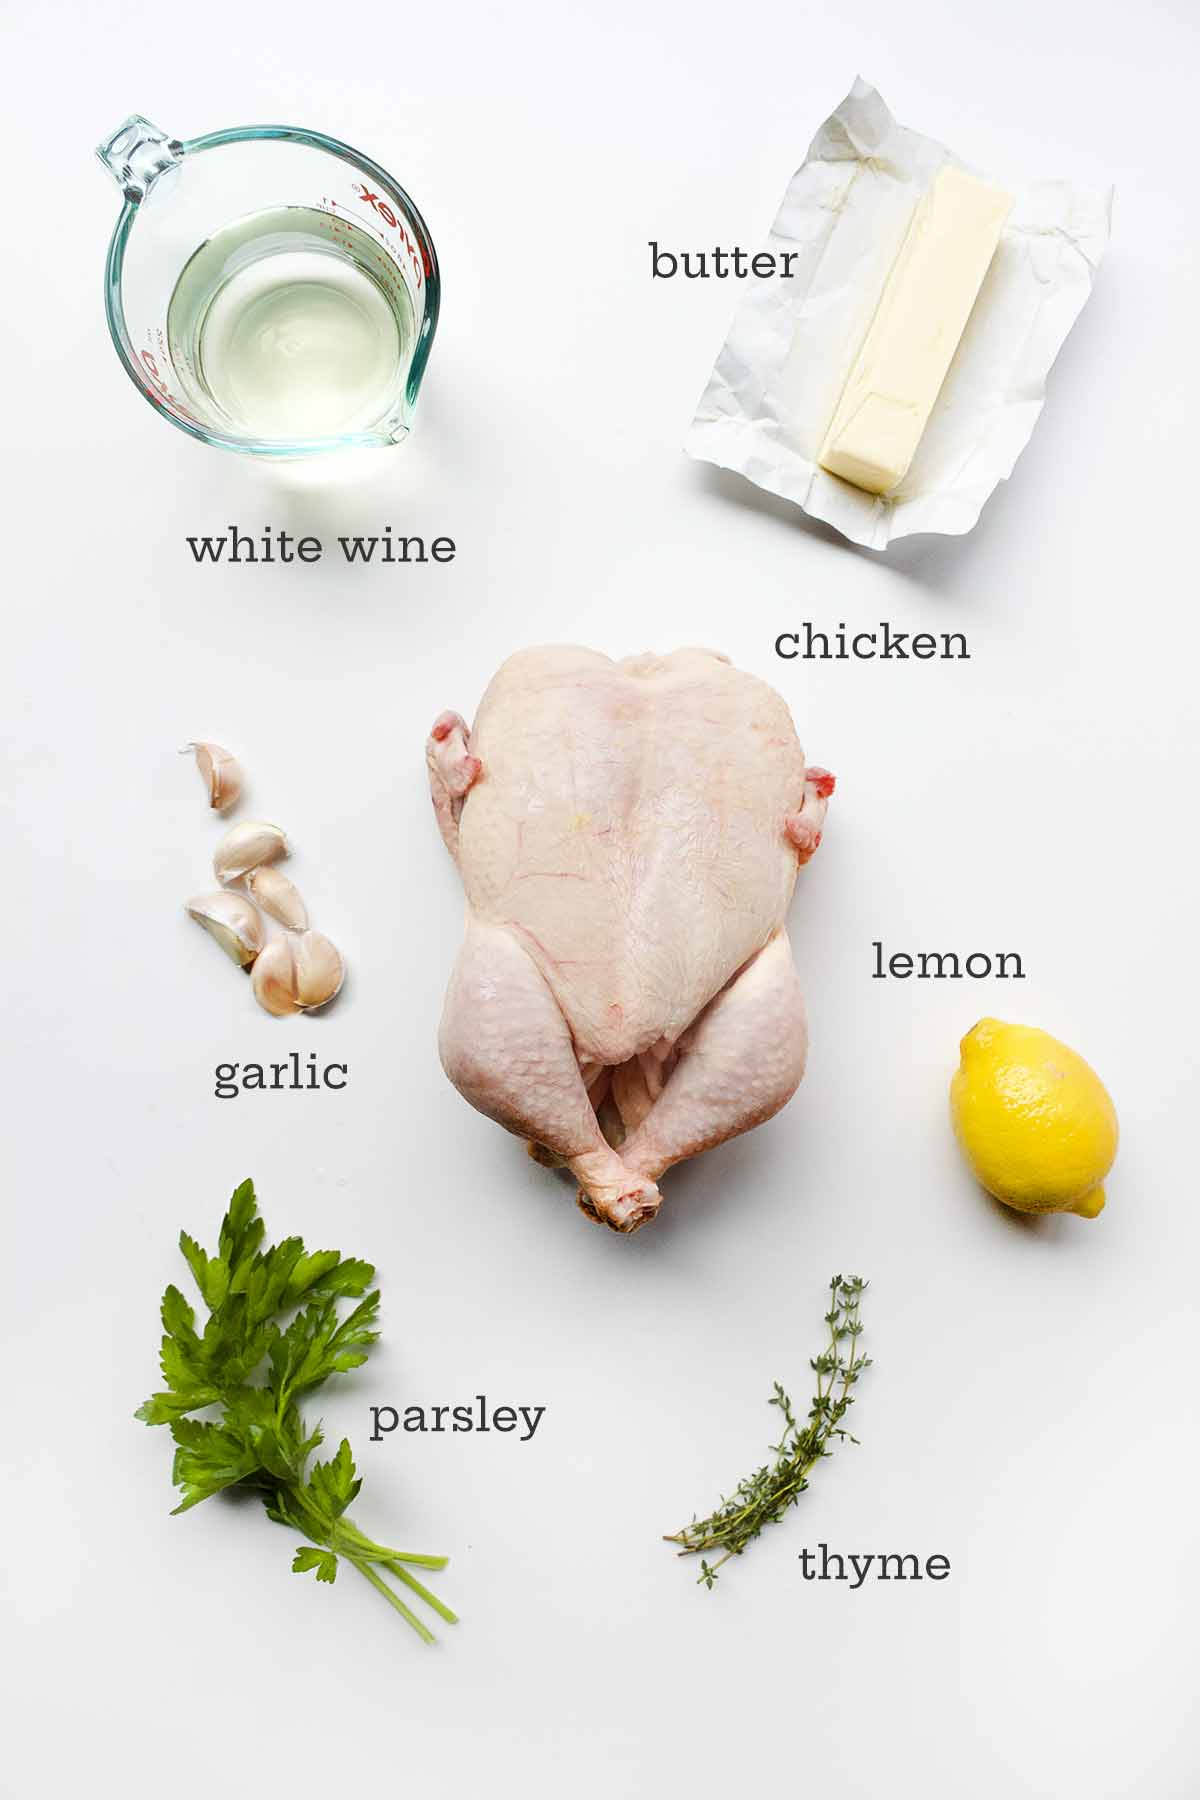 Ingredients for Spatchcock Roast Chicken - chicken, wine, butter, lemon, garlic, parsley and thyme.